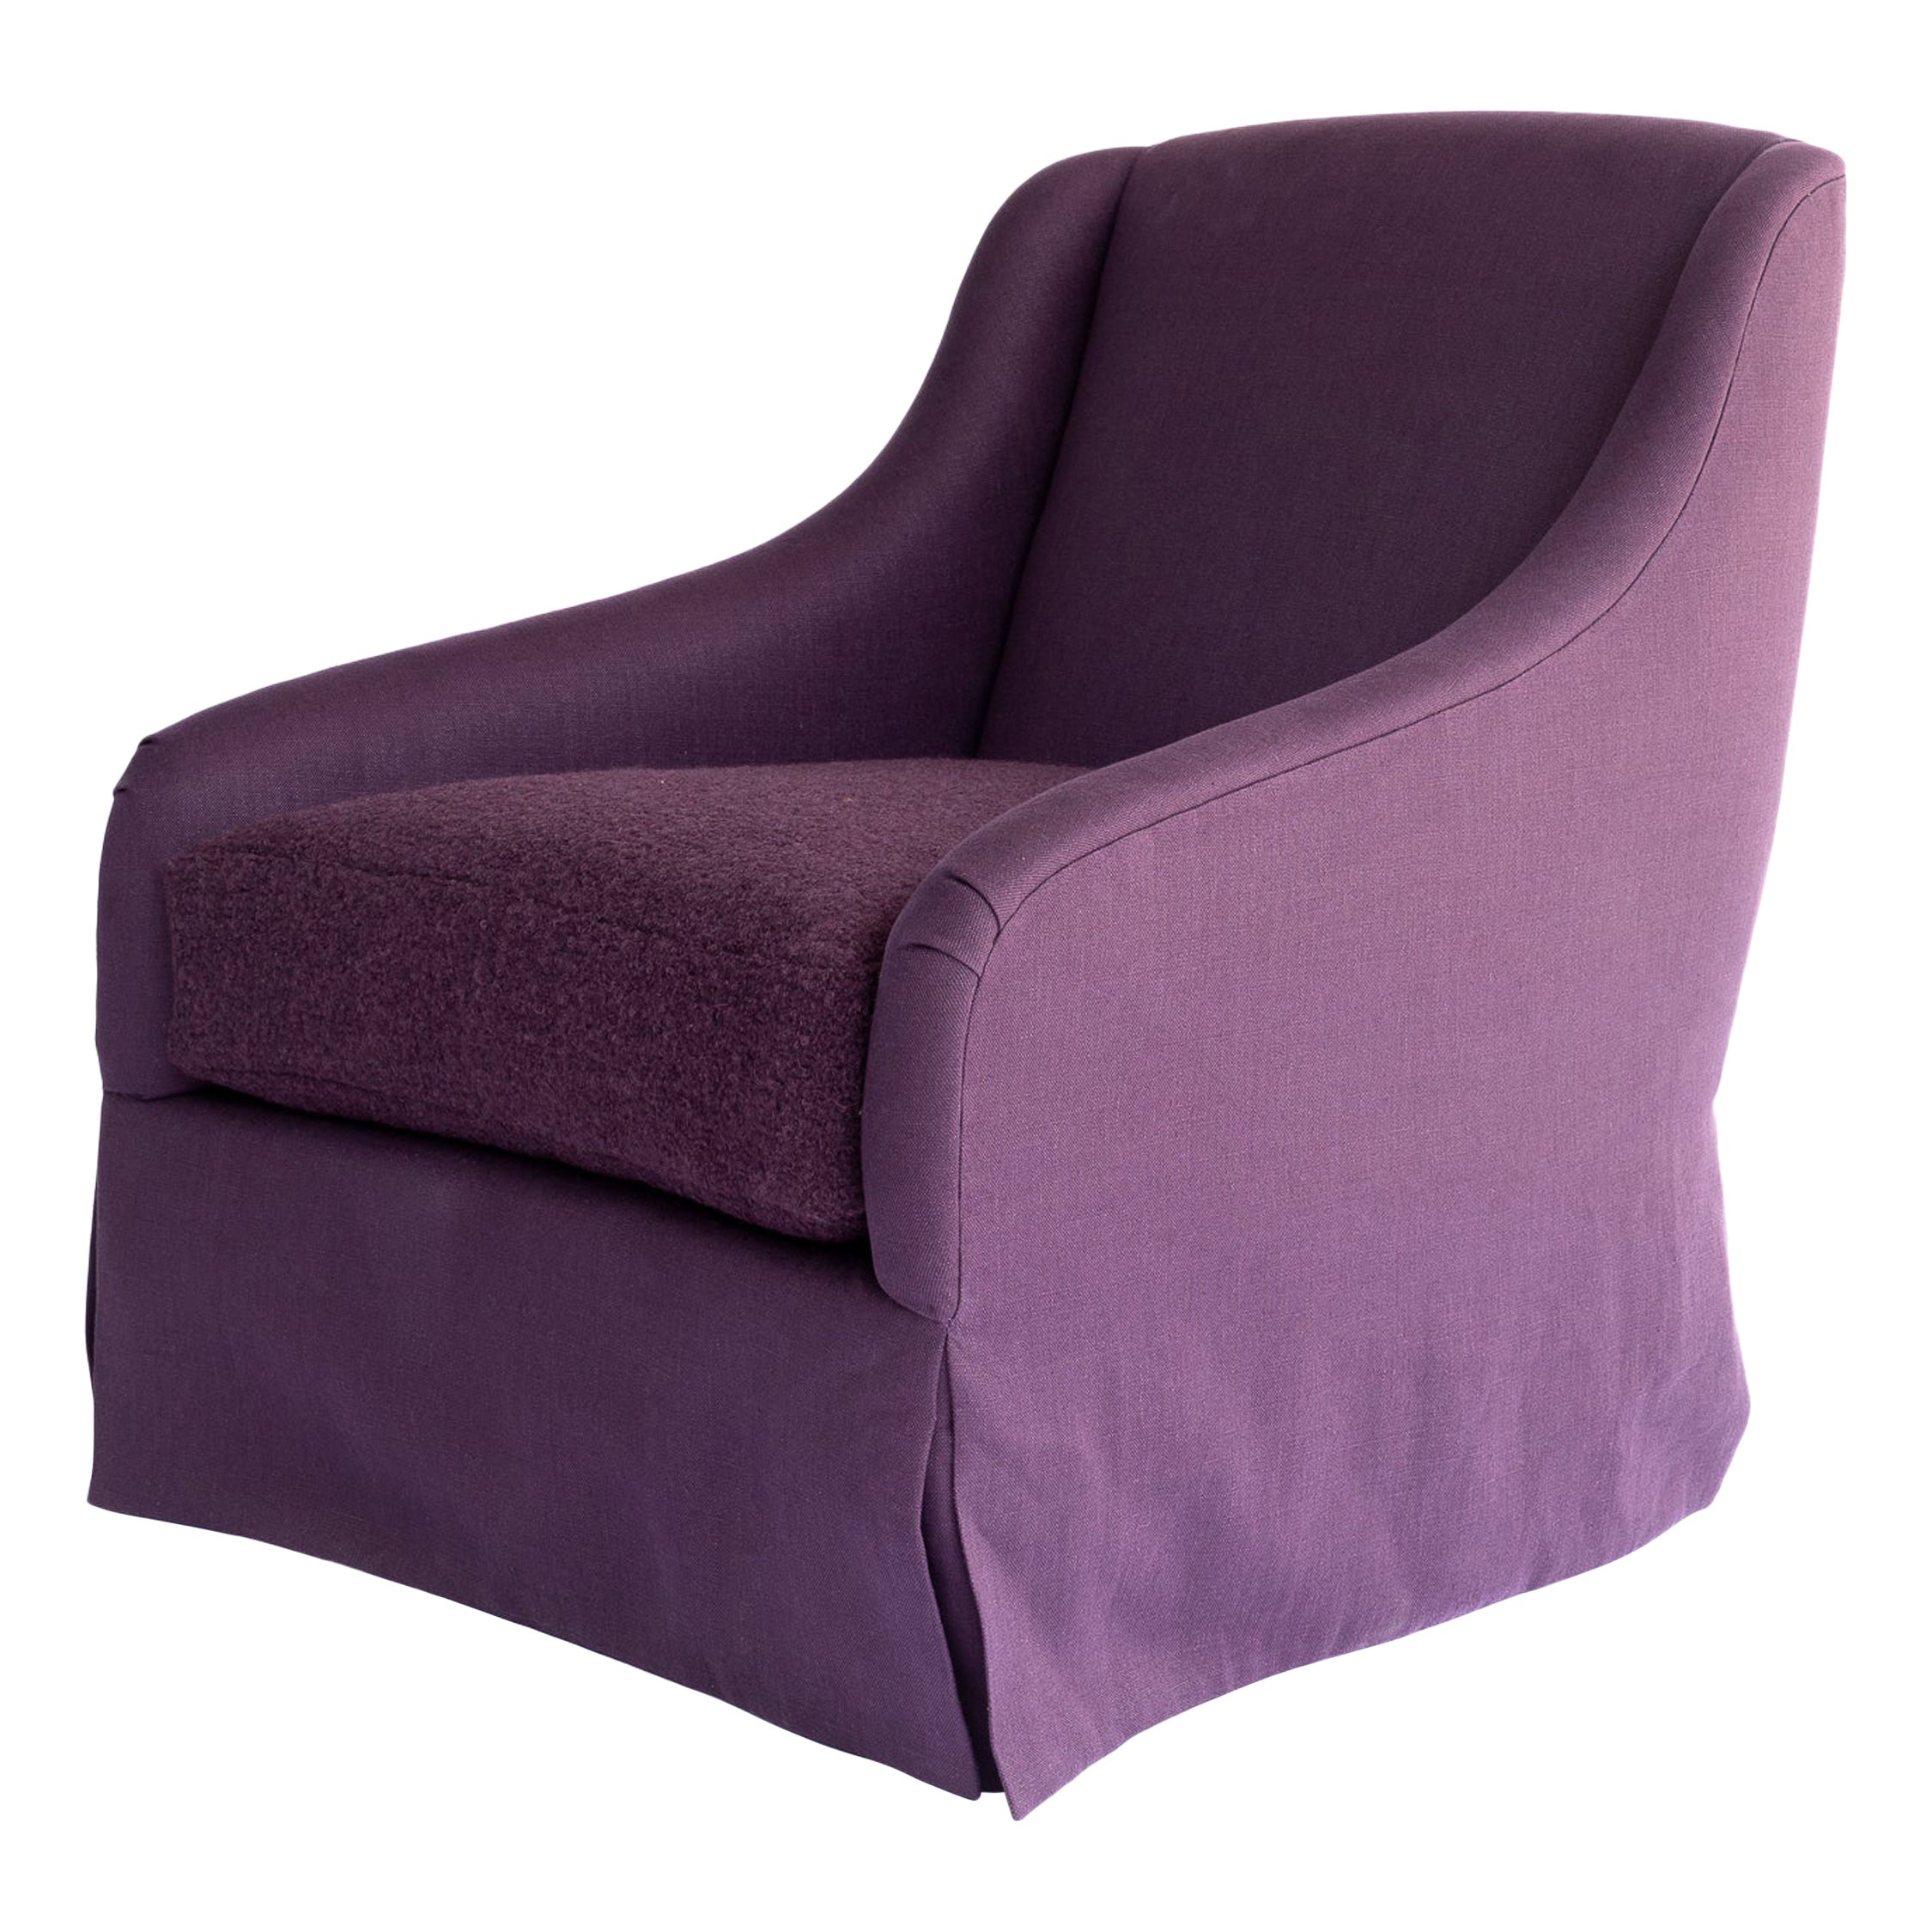 Slope Arms Slip-Covered Armchair For Sale